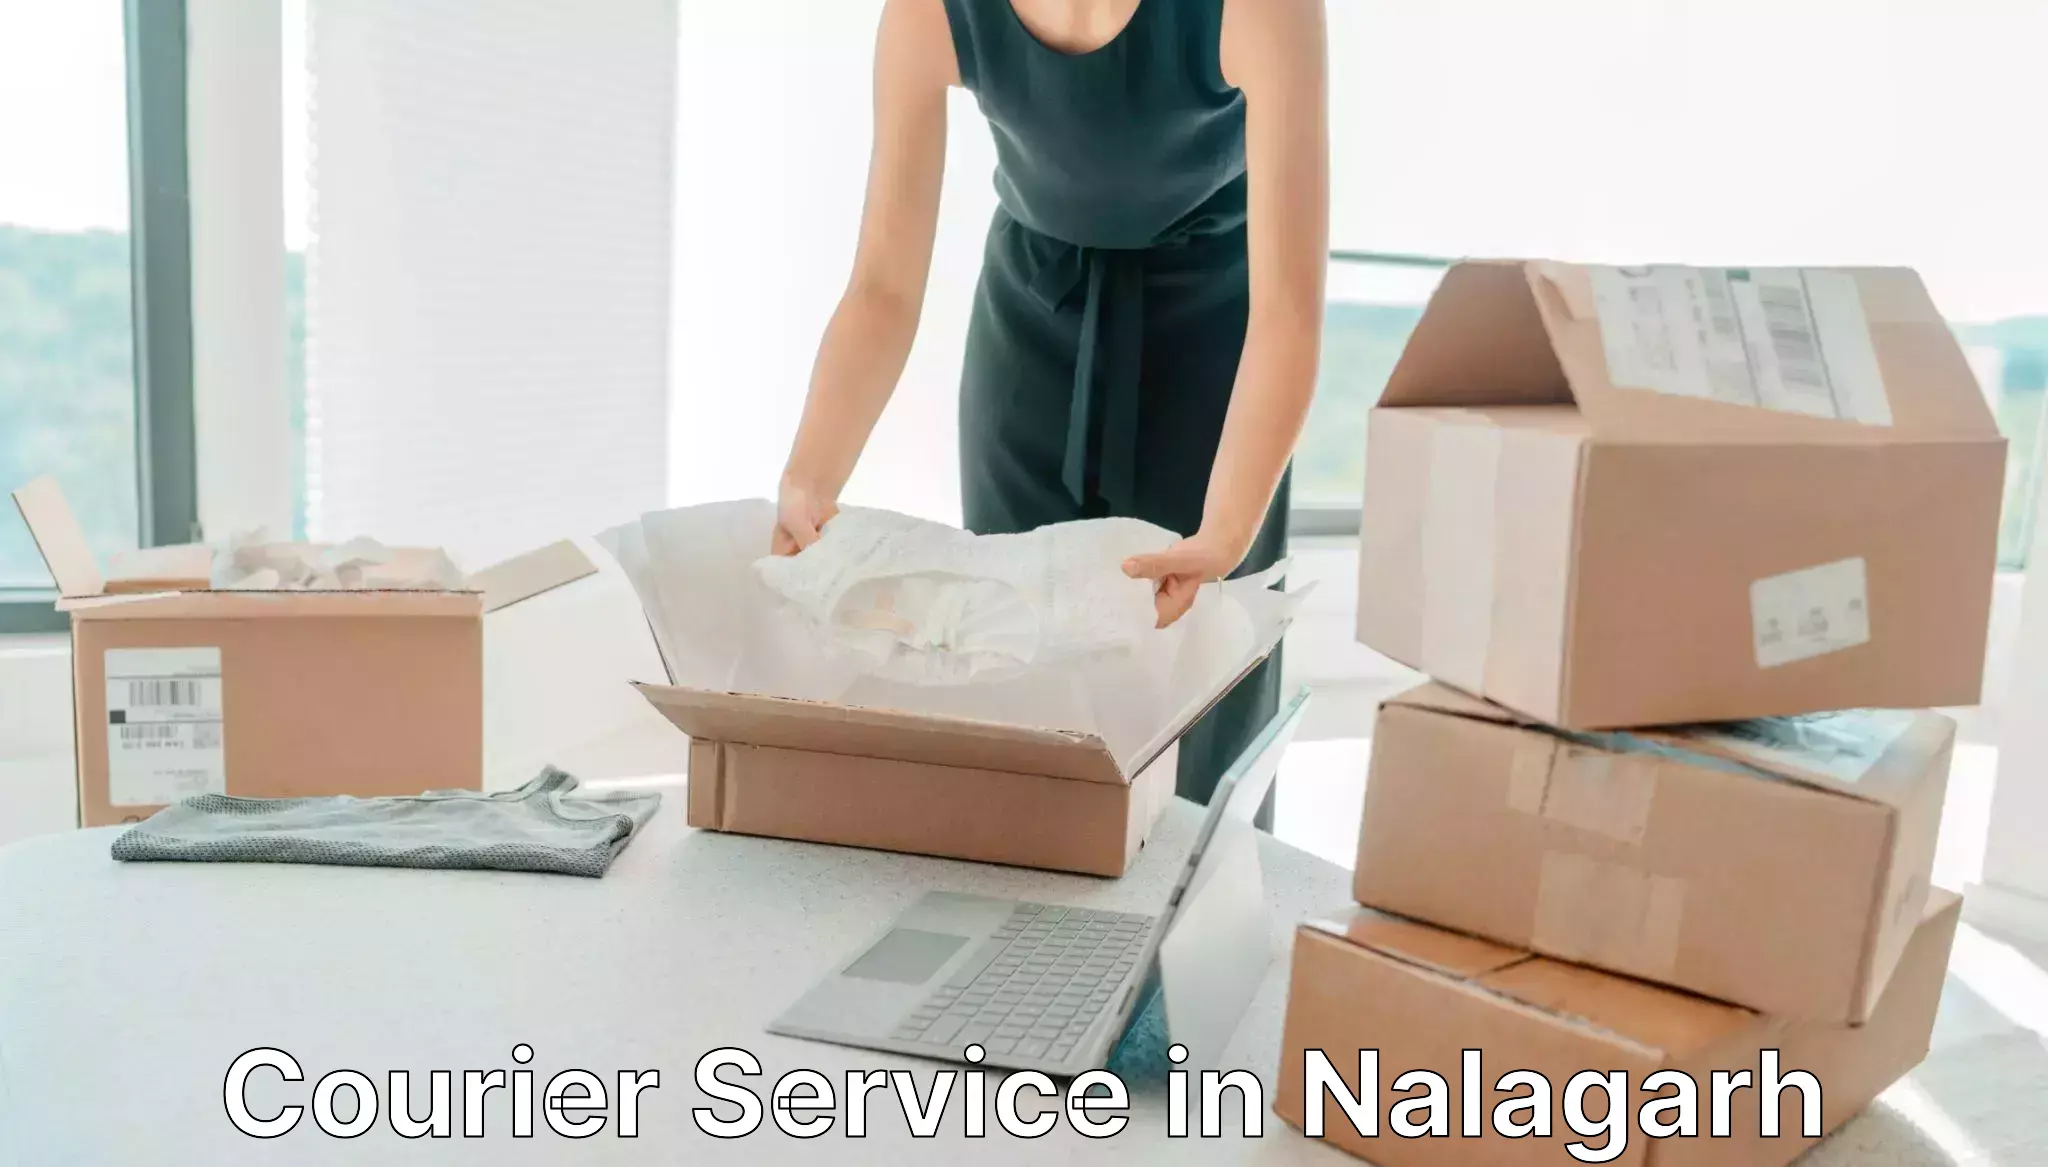 Integrated shipping systems in Nalagarh